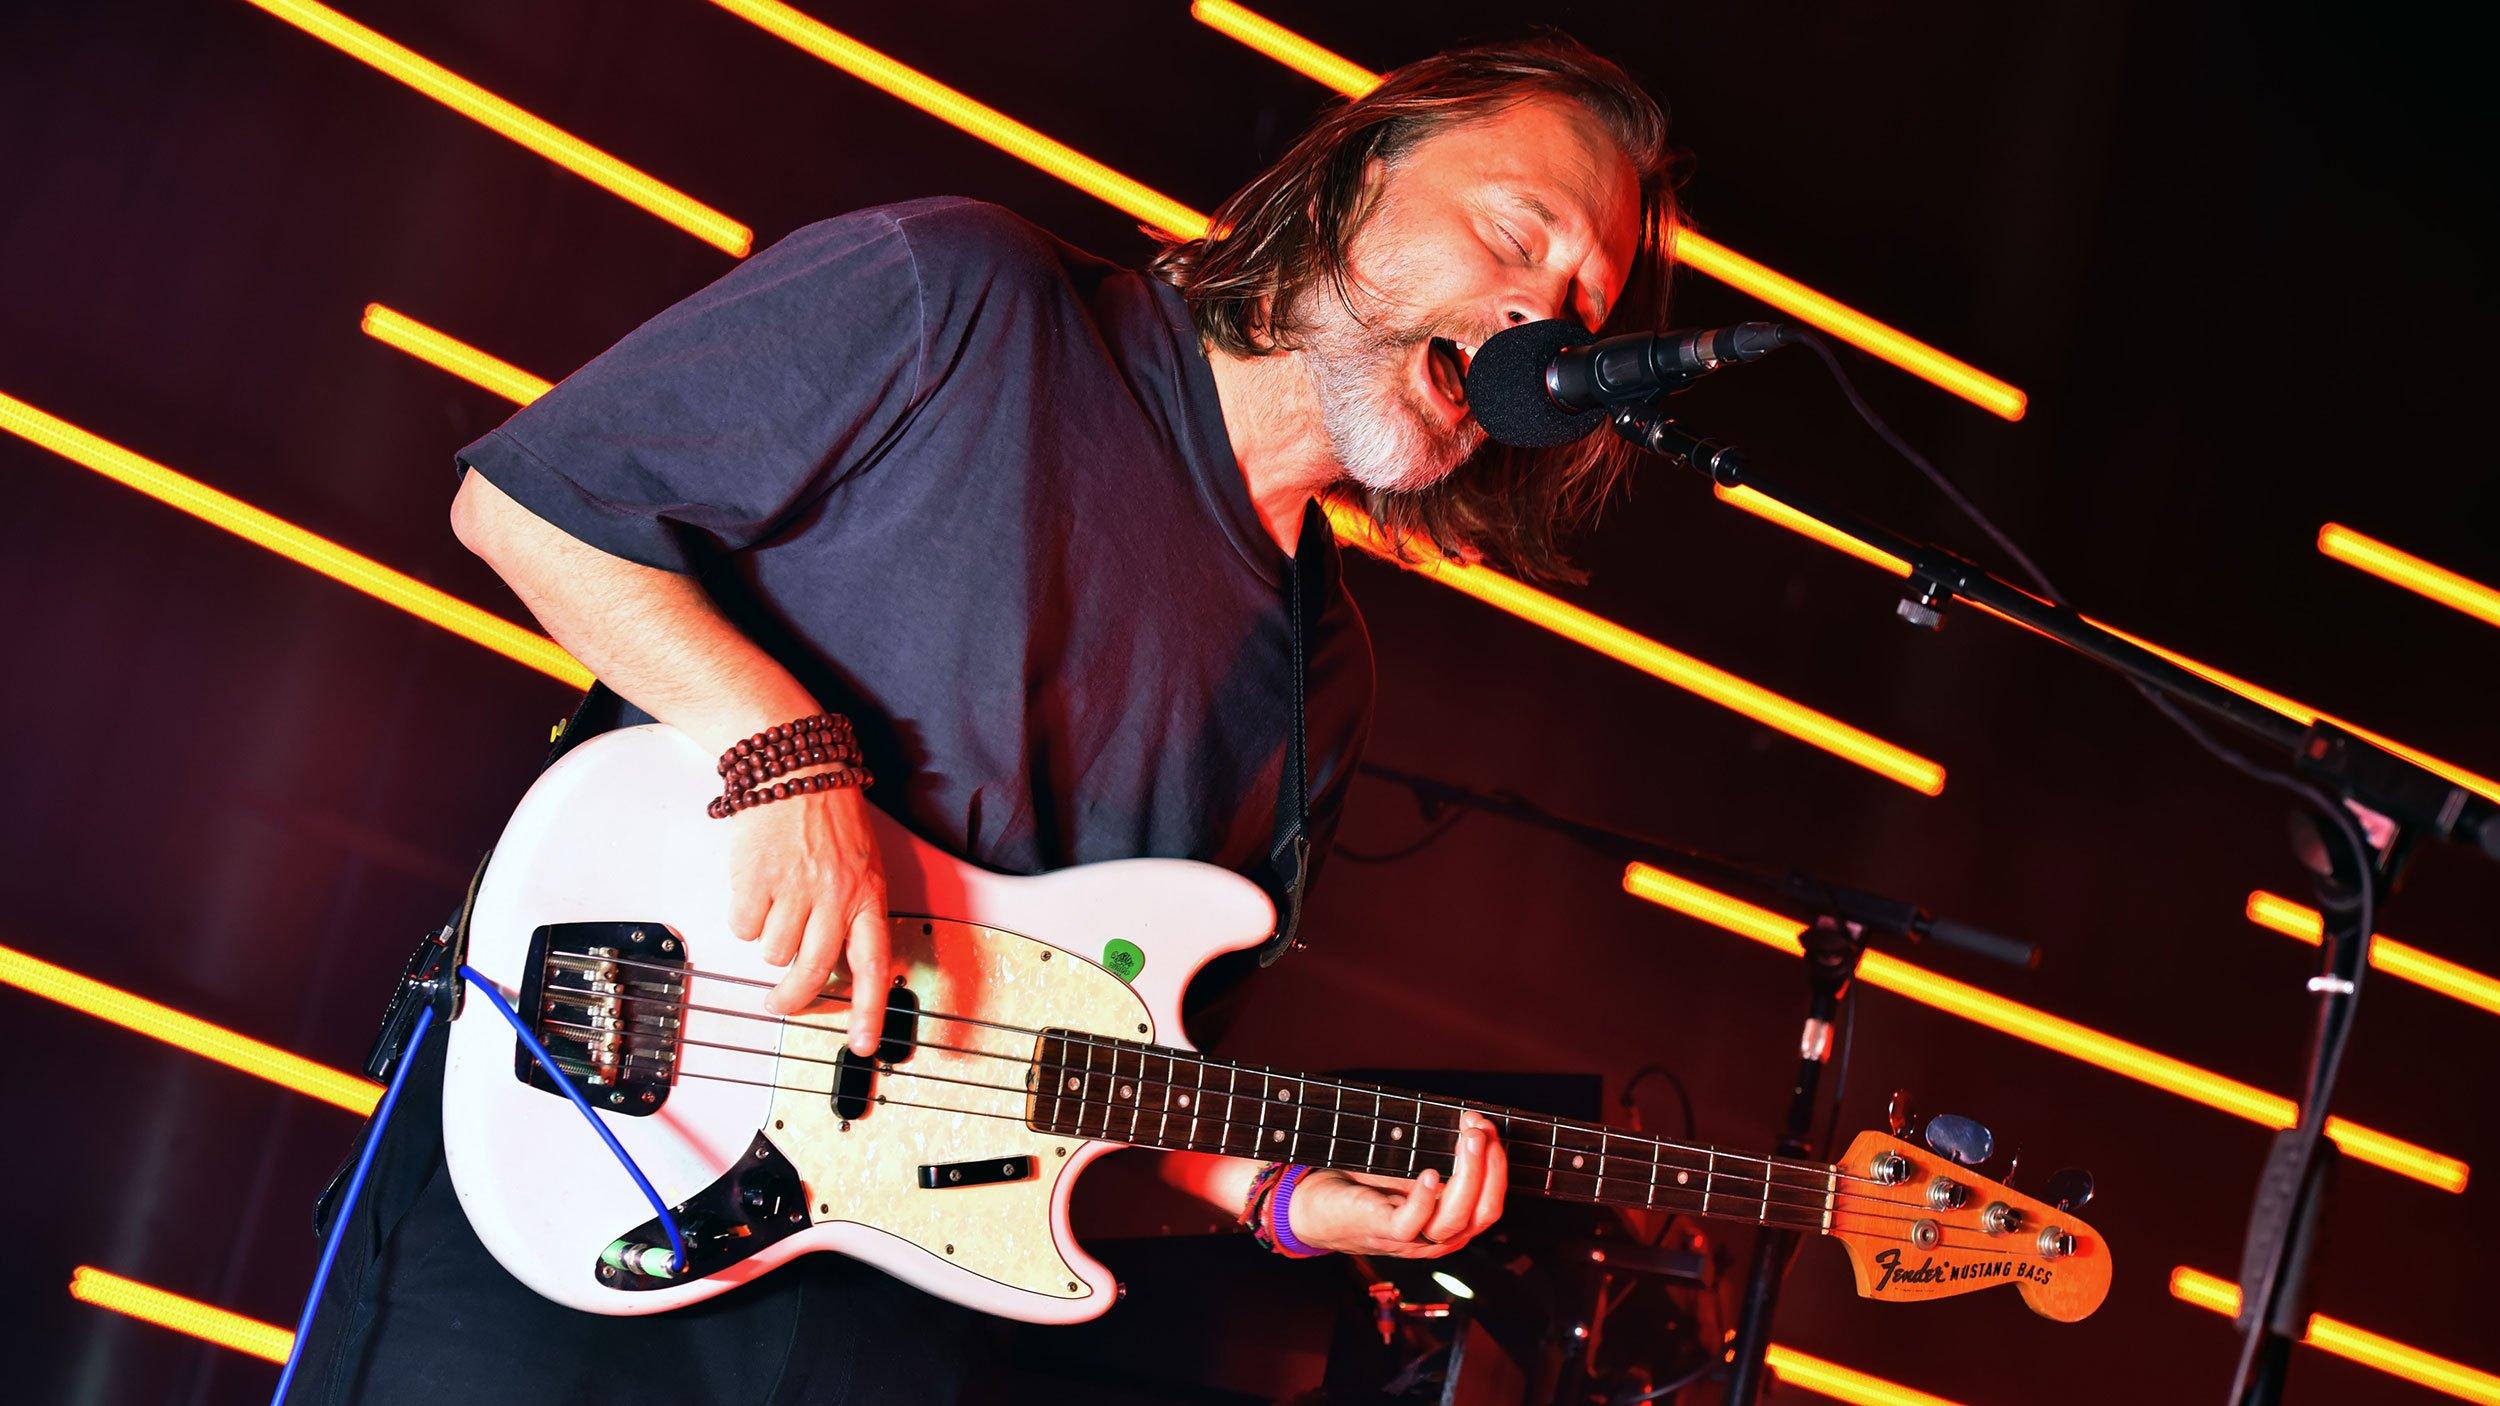 Thom Yorke plays the guitar during a performance with The Smile